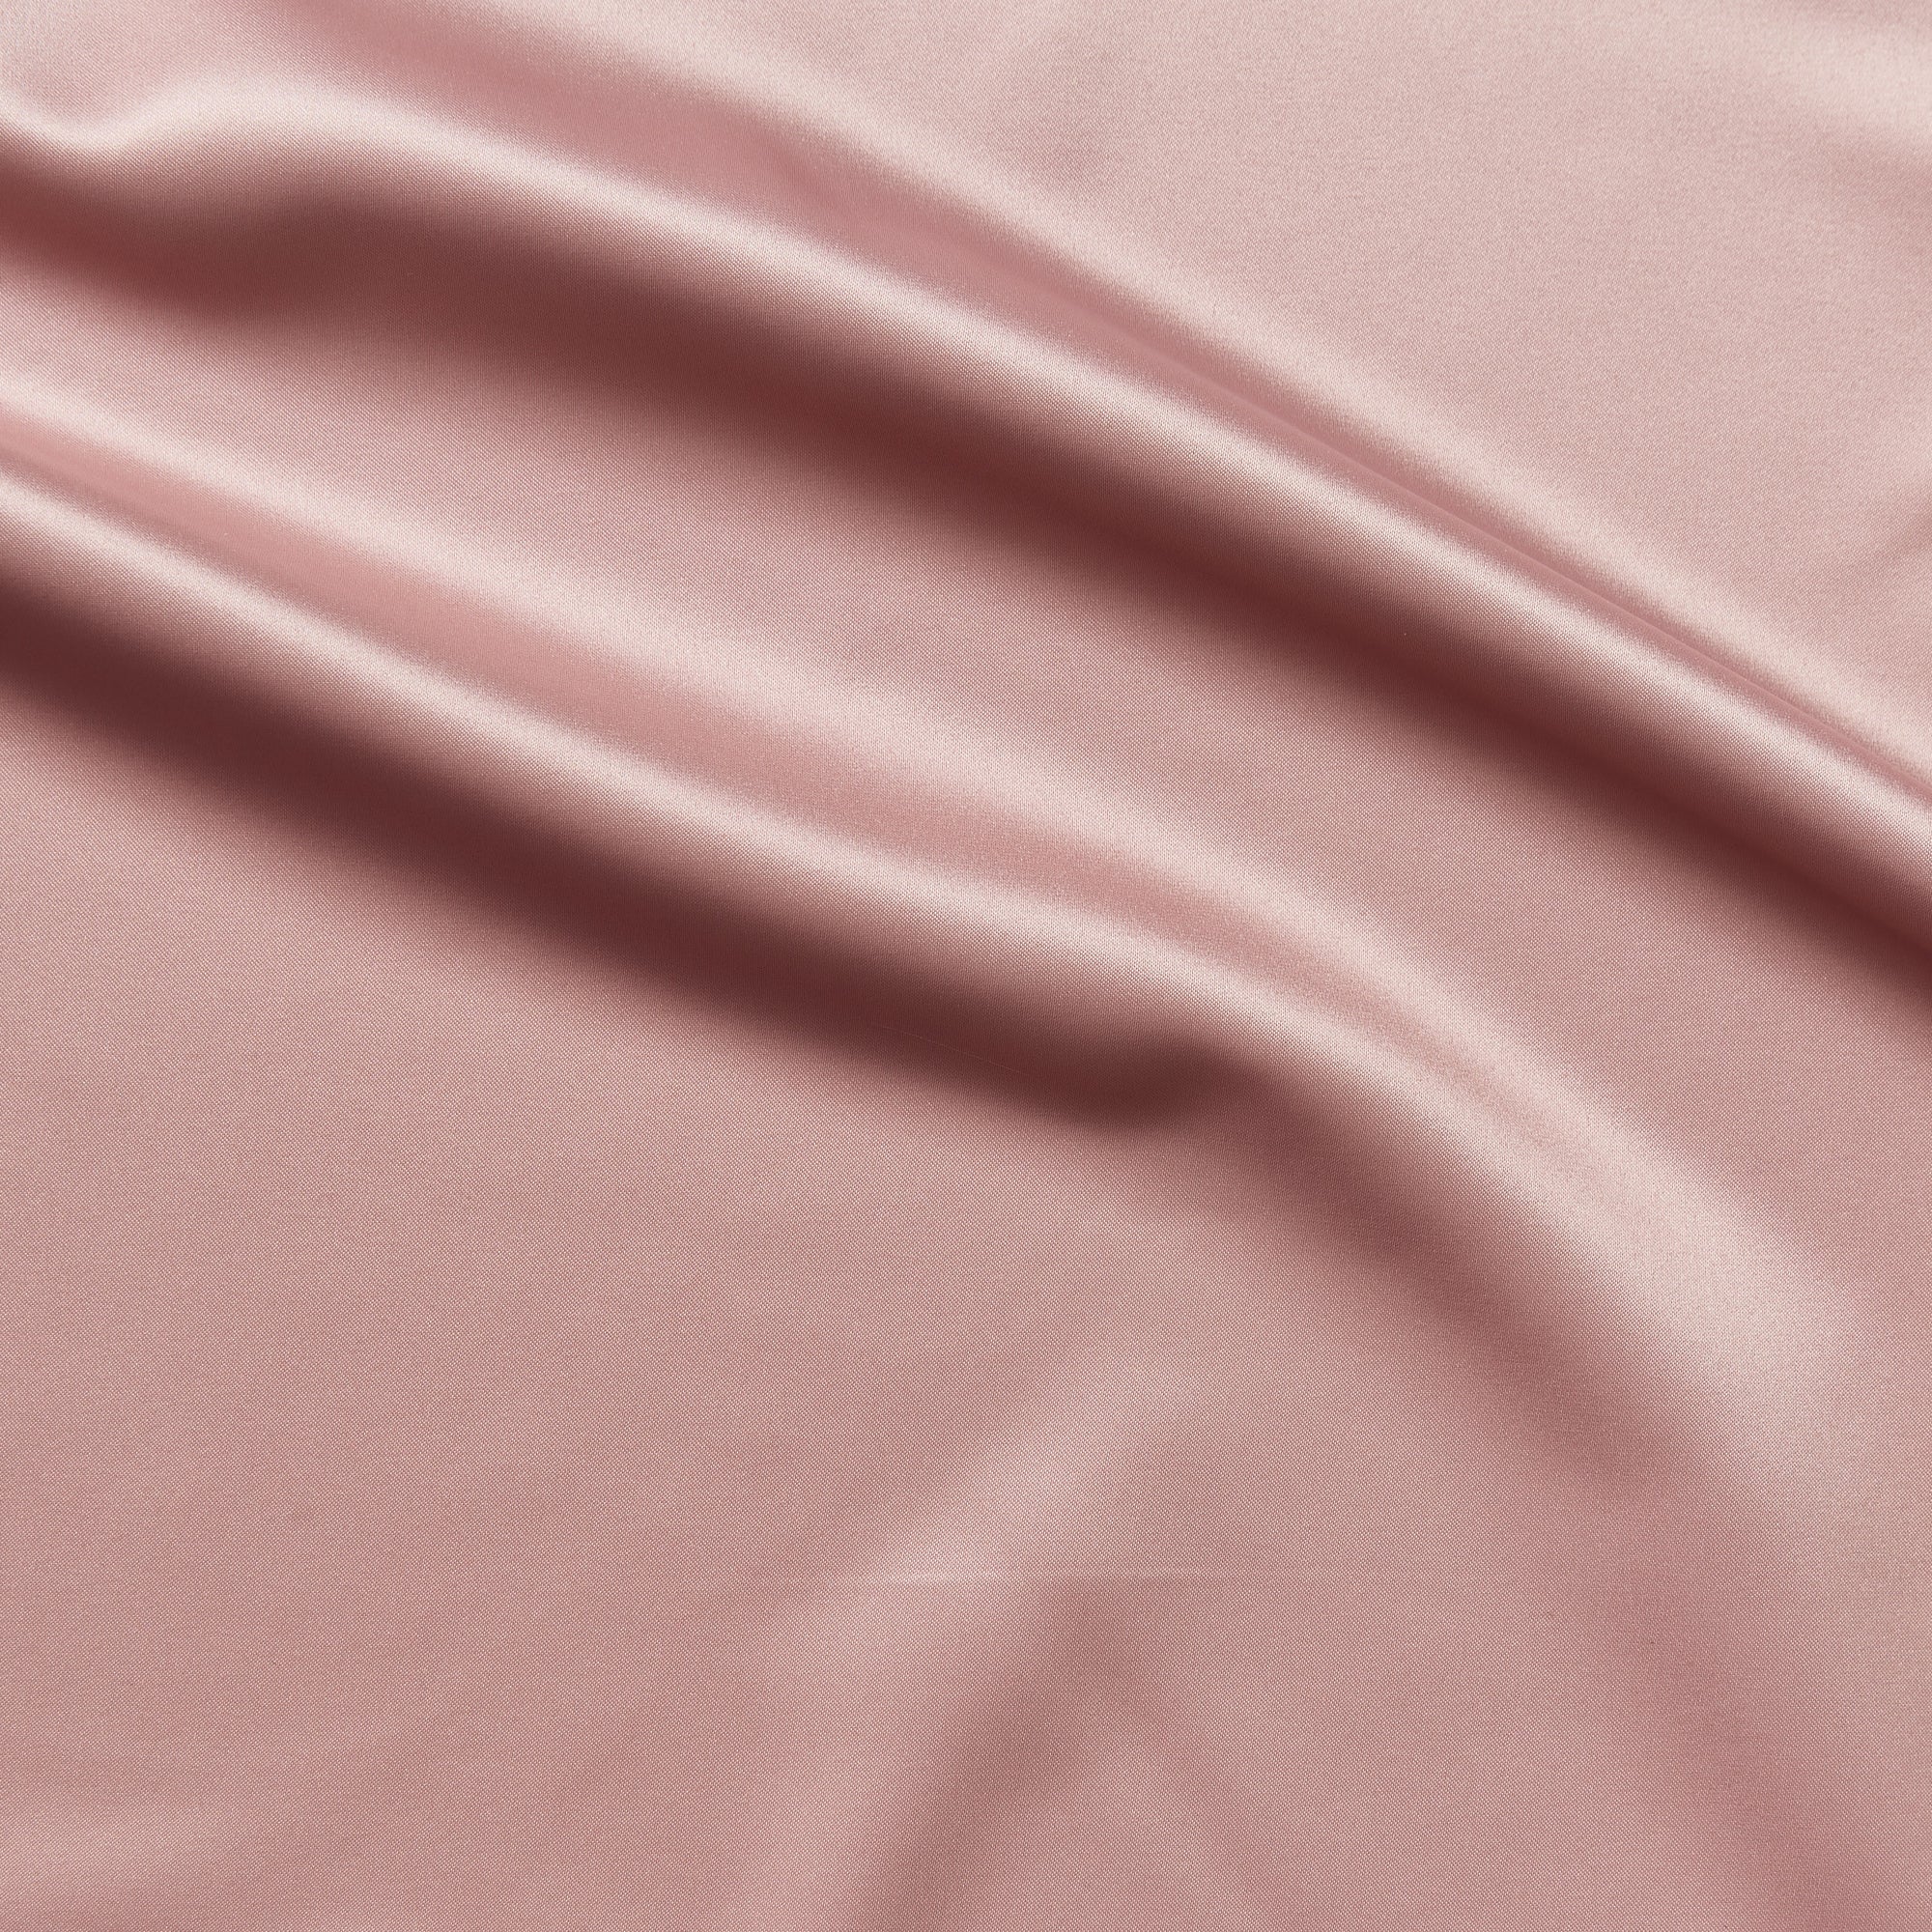 countess displaying the antique color version of a crisp satin pure polyester fabric with moderate drape suitable for dresses